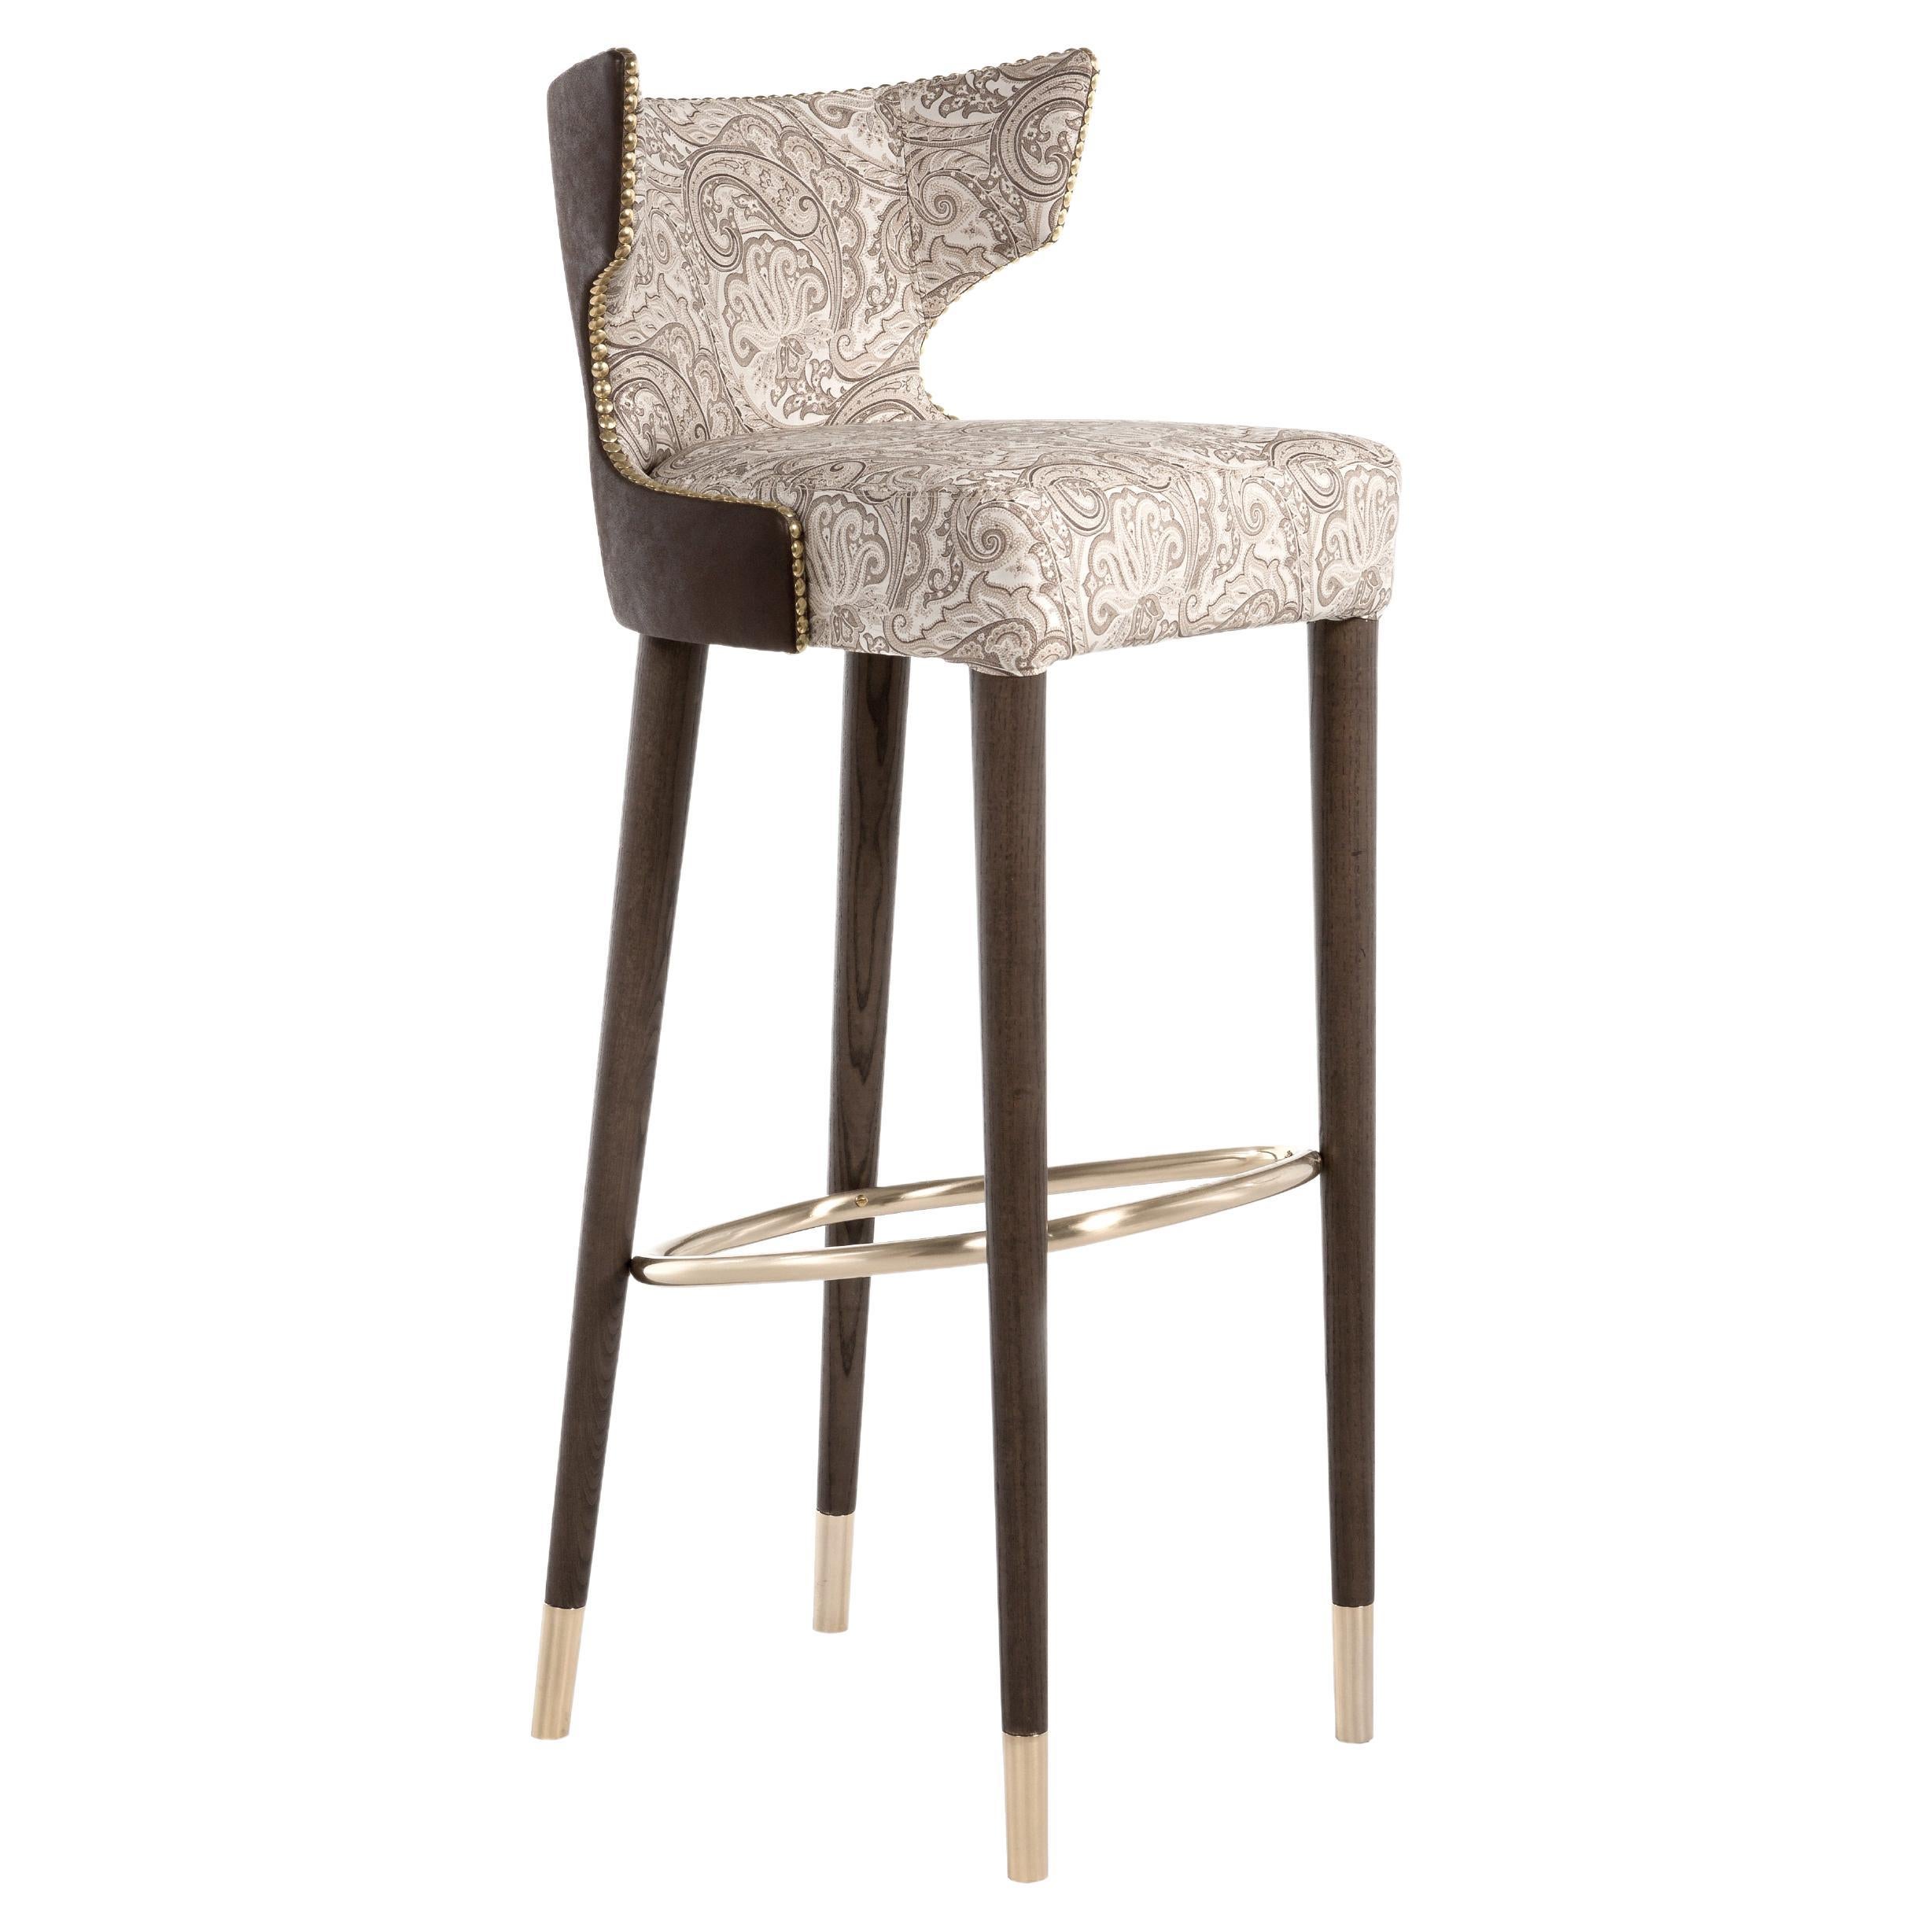 Contemporary Bar Stool Customizable, Wood Frame and Brass Details, Made in Italy